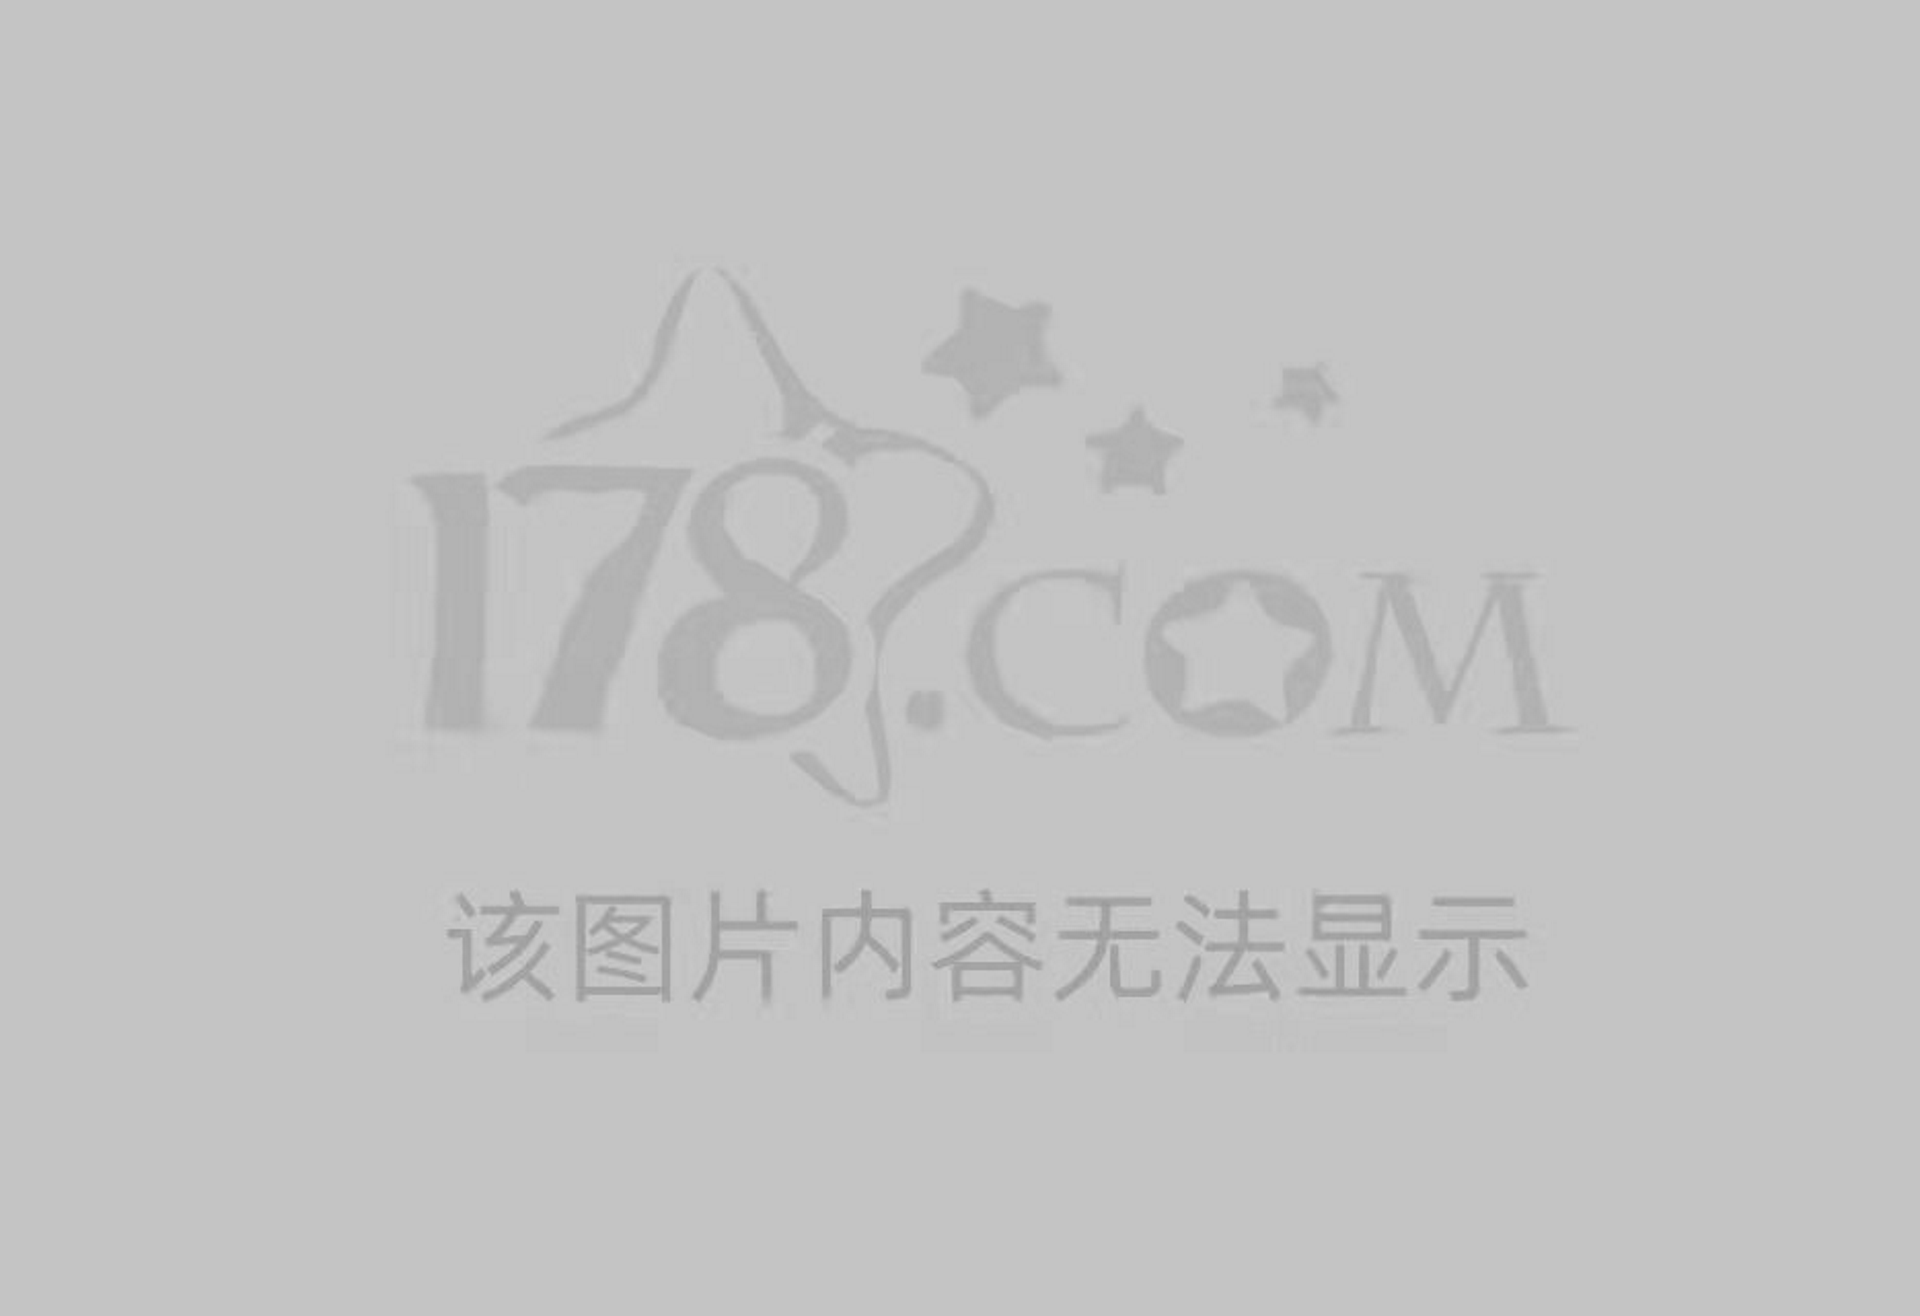 <strong>新开诛仙发布网：诛仙游戏怎么拿到诛仙剑</strong>